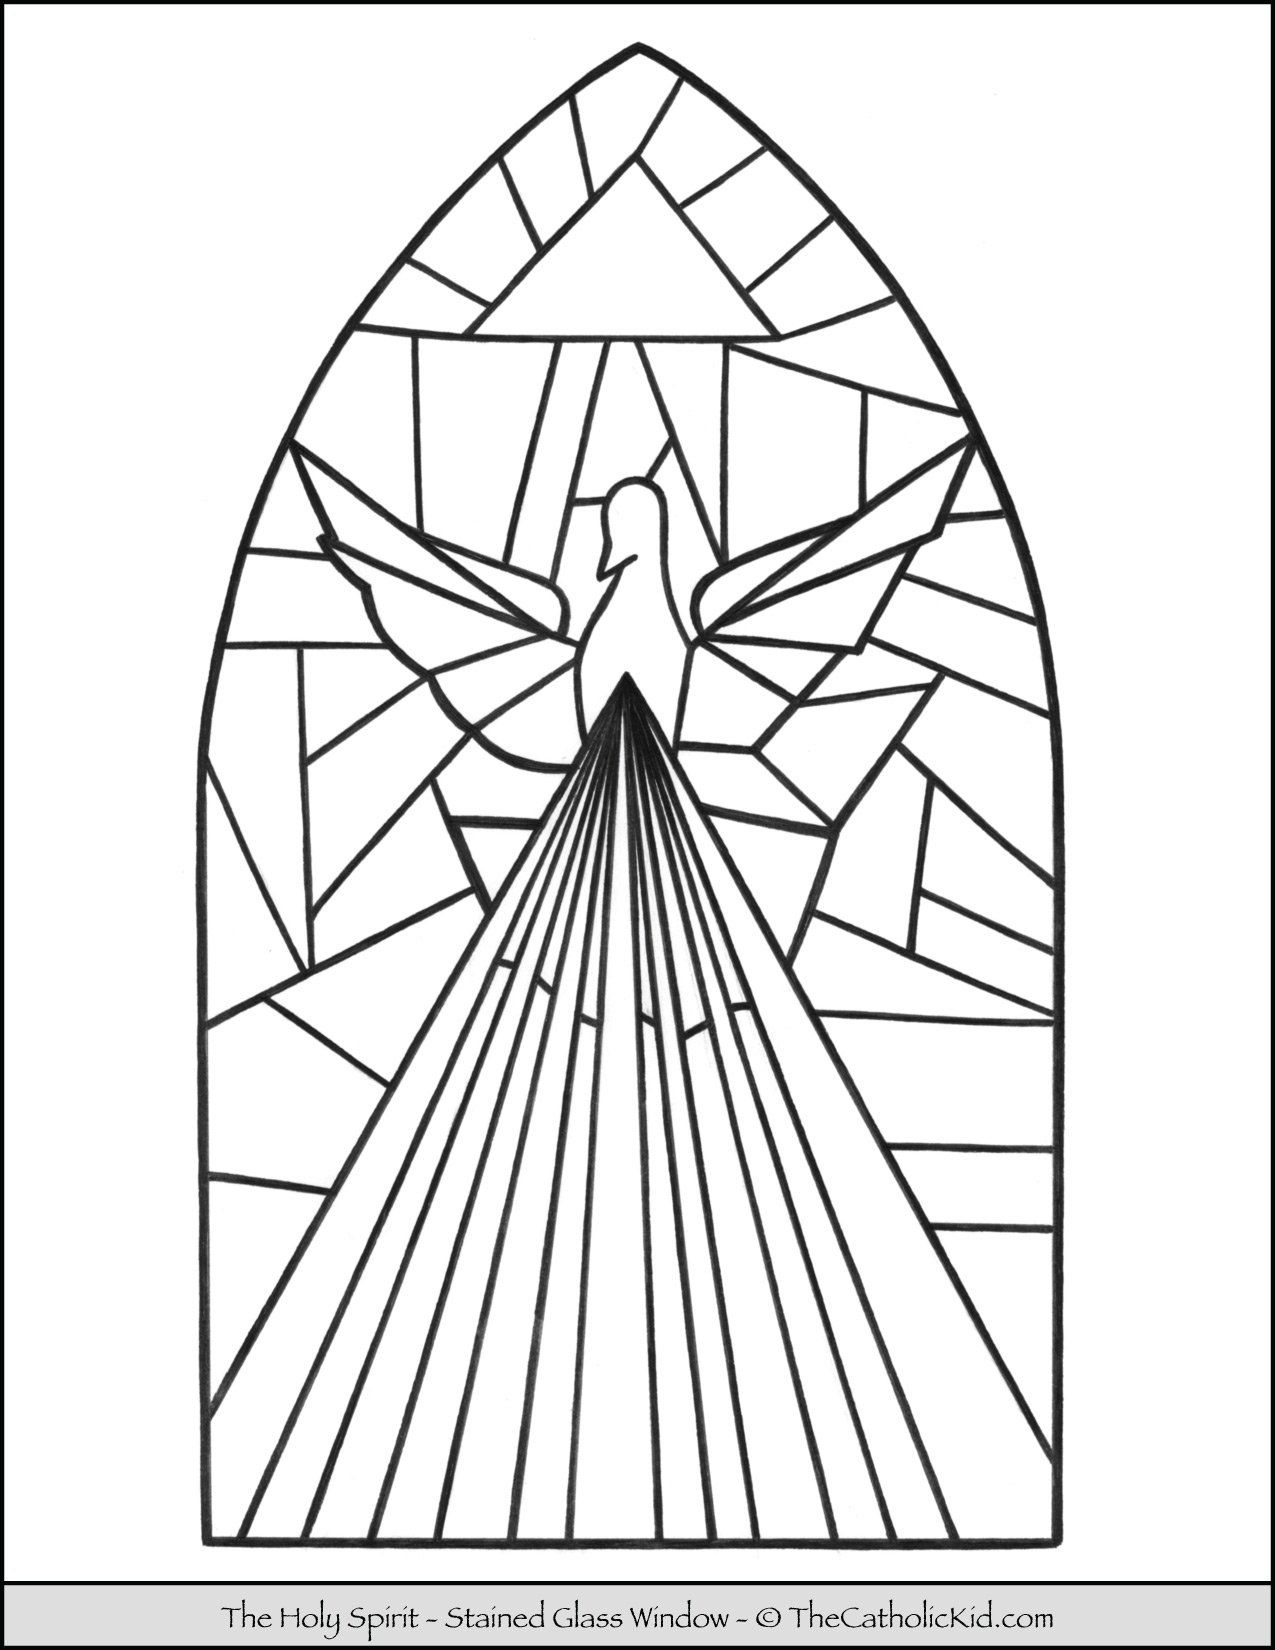 Sacrament of confirmation coloring pages download pack